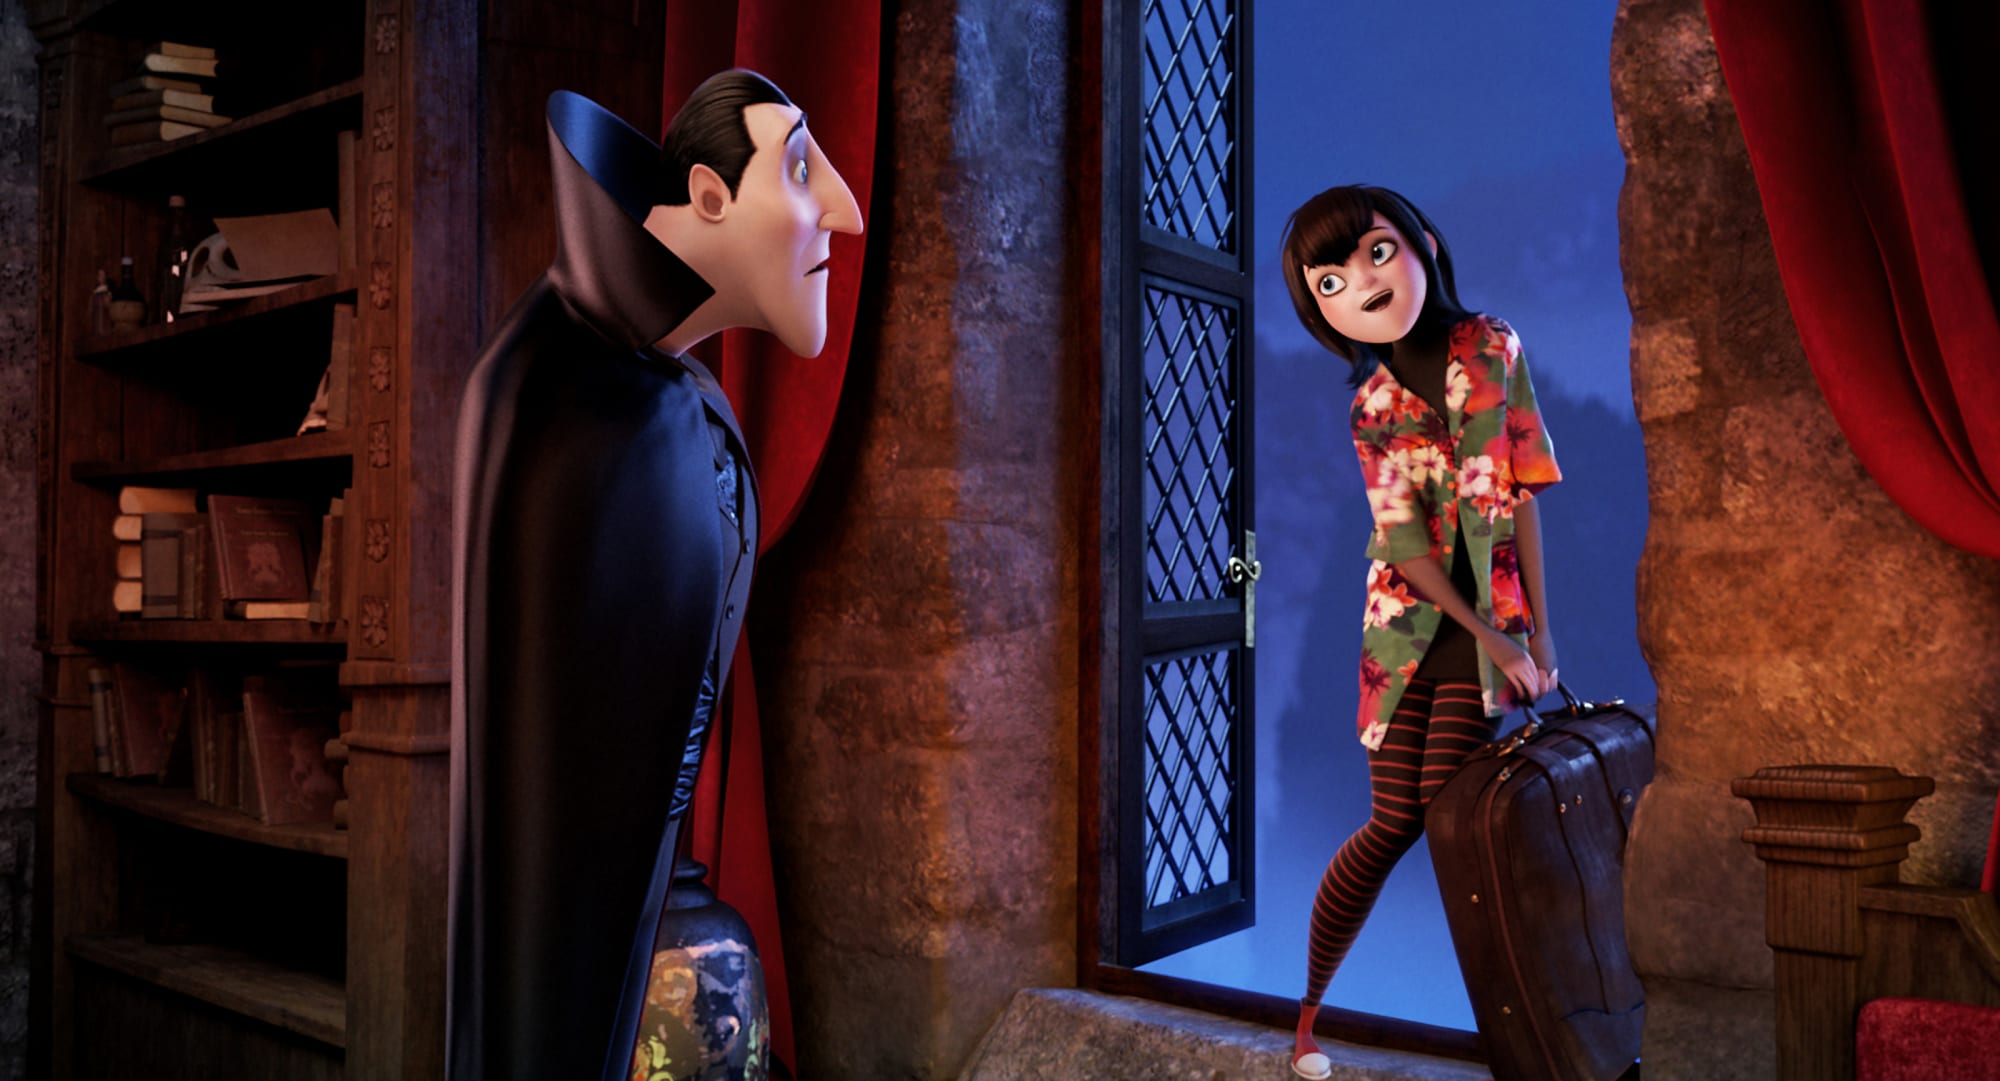 Hotel Transylvania 4 release date, cast, synopsis, trailer and more